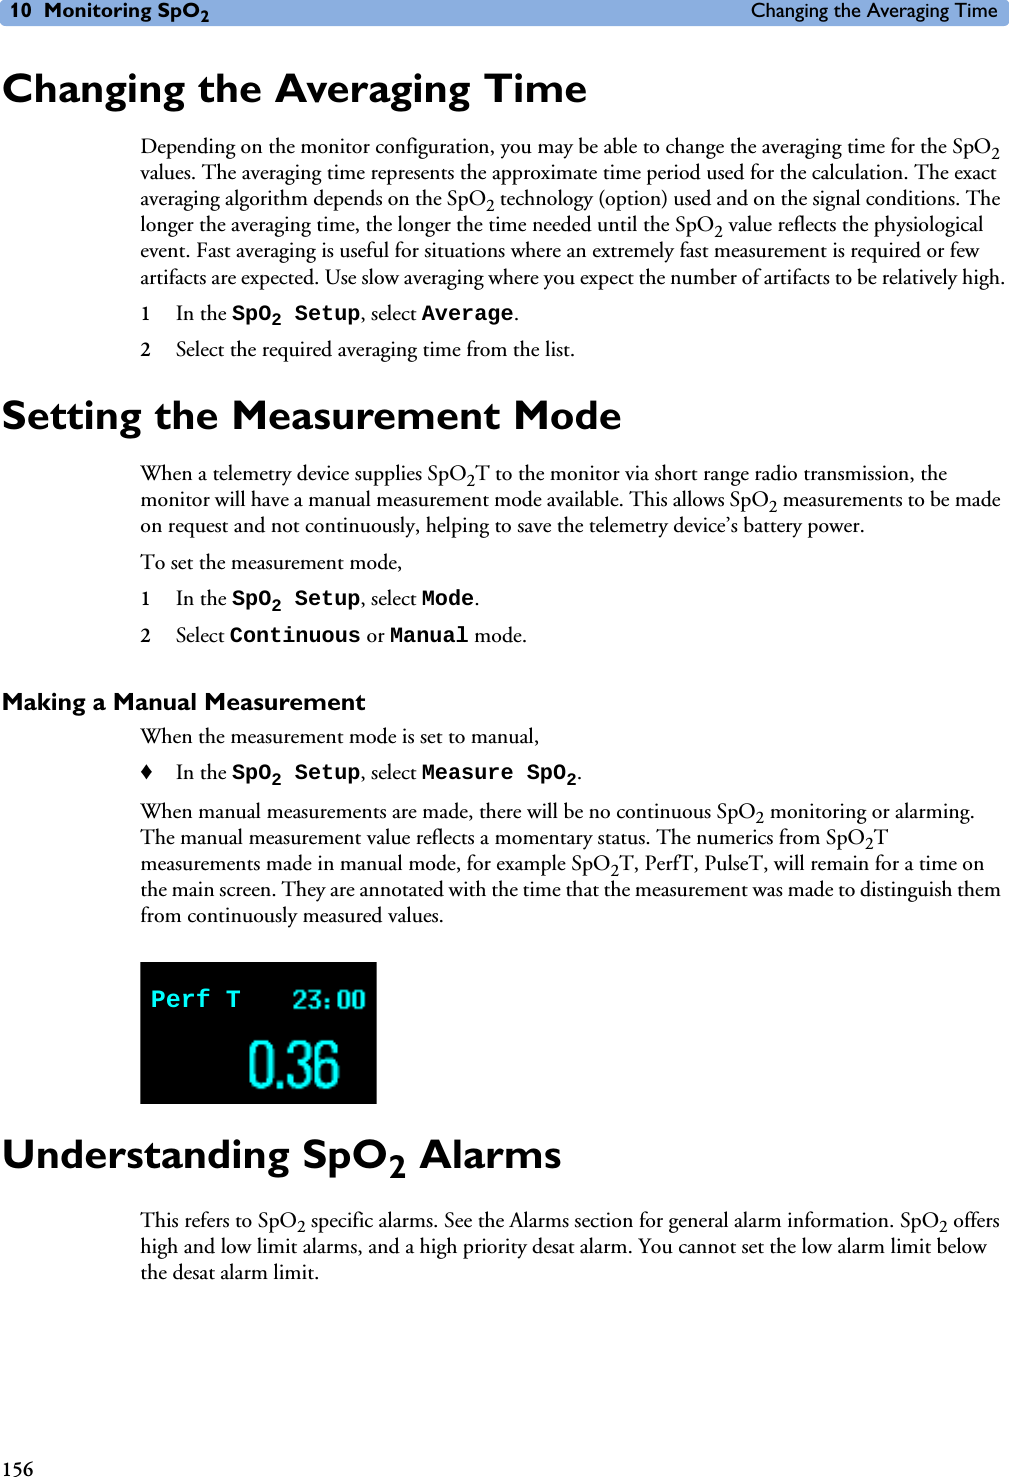 10 Monitoring SpO2Changing the Averaging Time156Changing the Averaging TimeDepending on the monitor configuration, you may be able to change the averaging time for the SpO2 values. The averaging time represents the approximate time period used for the calculation. The exact averaging algorithm depends on the SpO2 technology (option) used and on the signal conditions. The longer the averaging time, the longer the time needed until the SpO2 value reflects the physiological event. Fast averaging is useful for situations where an extremely fast measurement is required or few artifacts are expected. Use slow averaging where you expect the number of artifacts to be relatively high.1In the SpO2 Setup, select Average.2Select the required averaging time from the list. Setting the Measurement ModeWhen a telemetry device supplies SpO2T to the monitor via short range radio transmission, the monitor will have a manual measurement mode available. This allows SpO2 measurements to be made on request and not continuously, helping to save the telemetry device’s battery power. To set the measurement mode, 1In the SpO2 Setup, select Mode.2Select Continuous or Manual mode.Making a Manual MeasurementWhen the measurement mode is set to manual, ♦In the SpO2 Setup, select Measure SpO2.When manual measurements are made, there will be no continuous SpO2 monitoring or alarming. The manual measurement value reflects a momentary status. The numerics from SpO2T measurements made in manual mode, for example SpO2T, PerfT, PulseT, will remain for a time on the main screen. They are annotated with the time that the measurement was made to distinguish them from continuously measured values. Understanding SpO2 AlarmsThis refers to SpO2 specific alarms. See the Alarms section for general alarm information. SpO2 offers high and low limit alarms, and a high priority desat alarm. You cannot set the low alarm limit below the desat alarm limit.Perf T